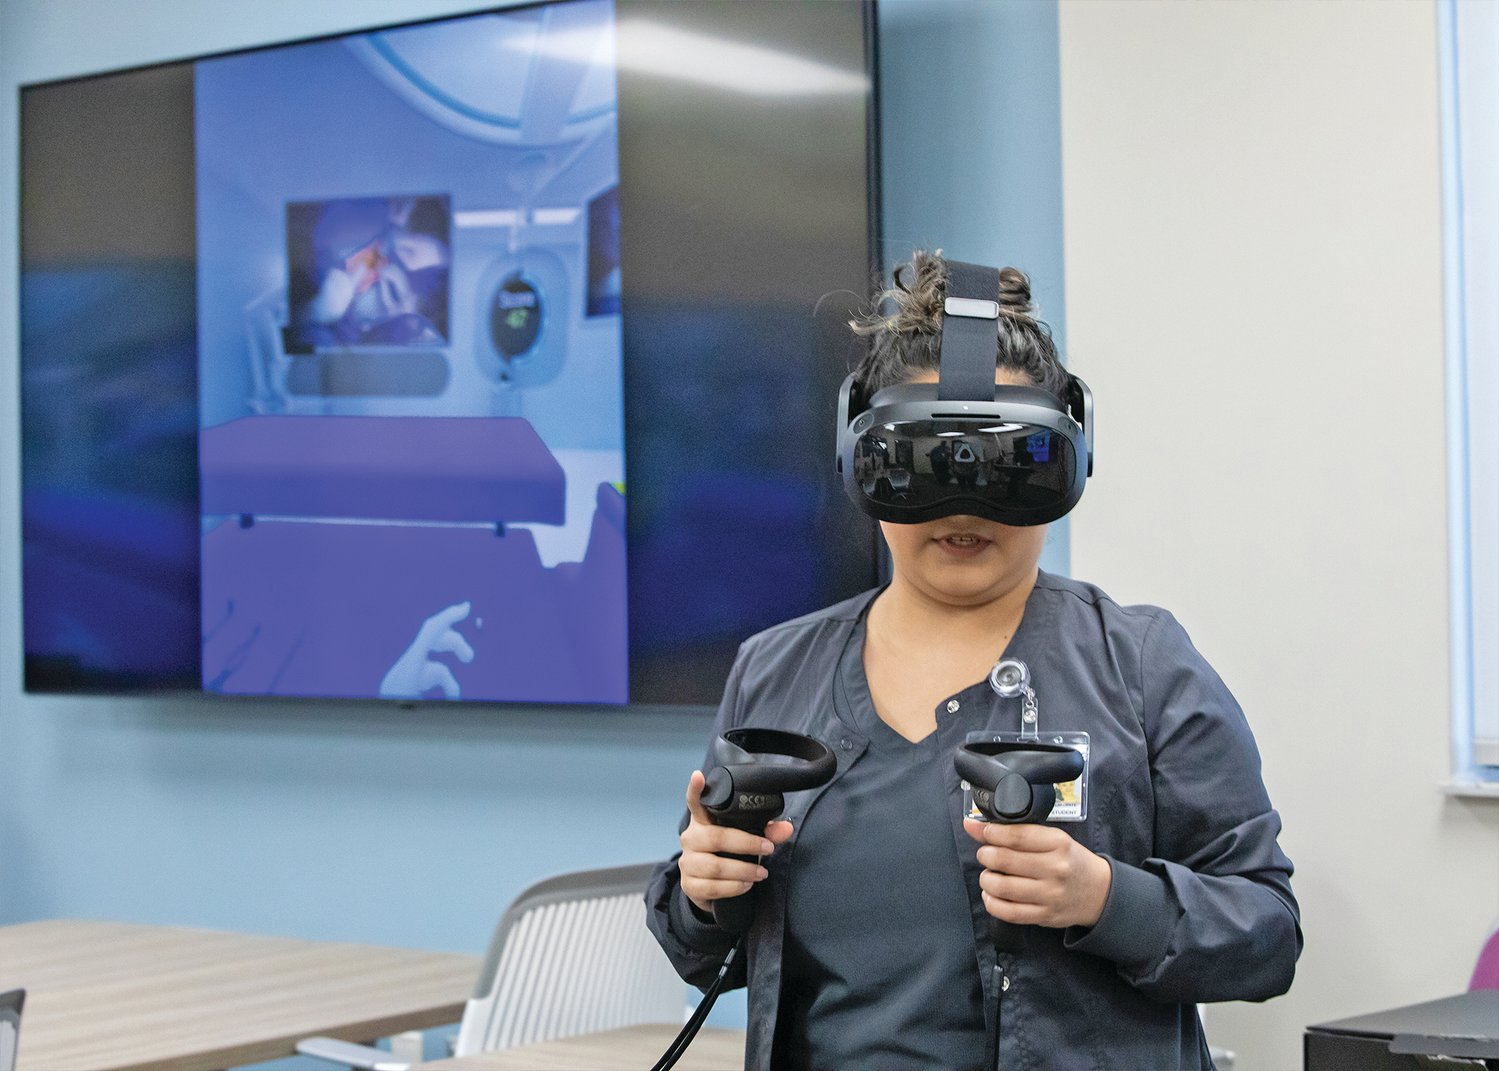 Bianca Delafuente, Surgical Services program student, demonstrates virtual reality equipment.